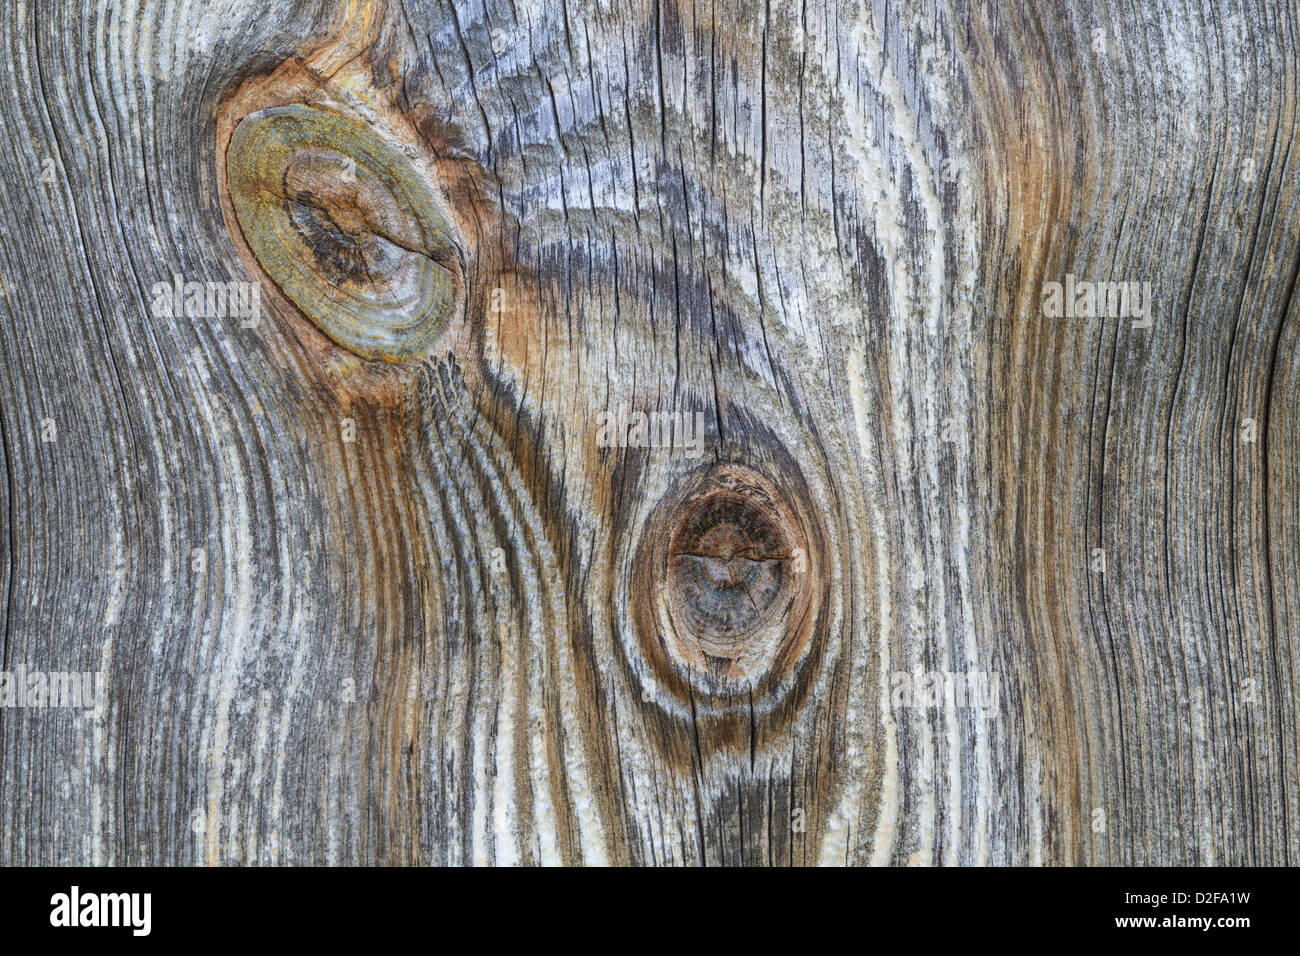 Closeup detail of wooden plank with trunk knot from old branch Stock Photo